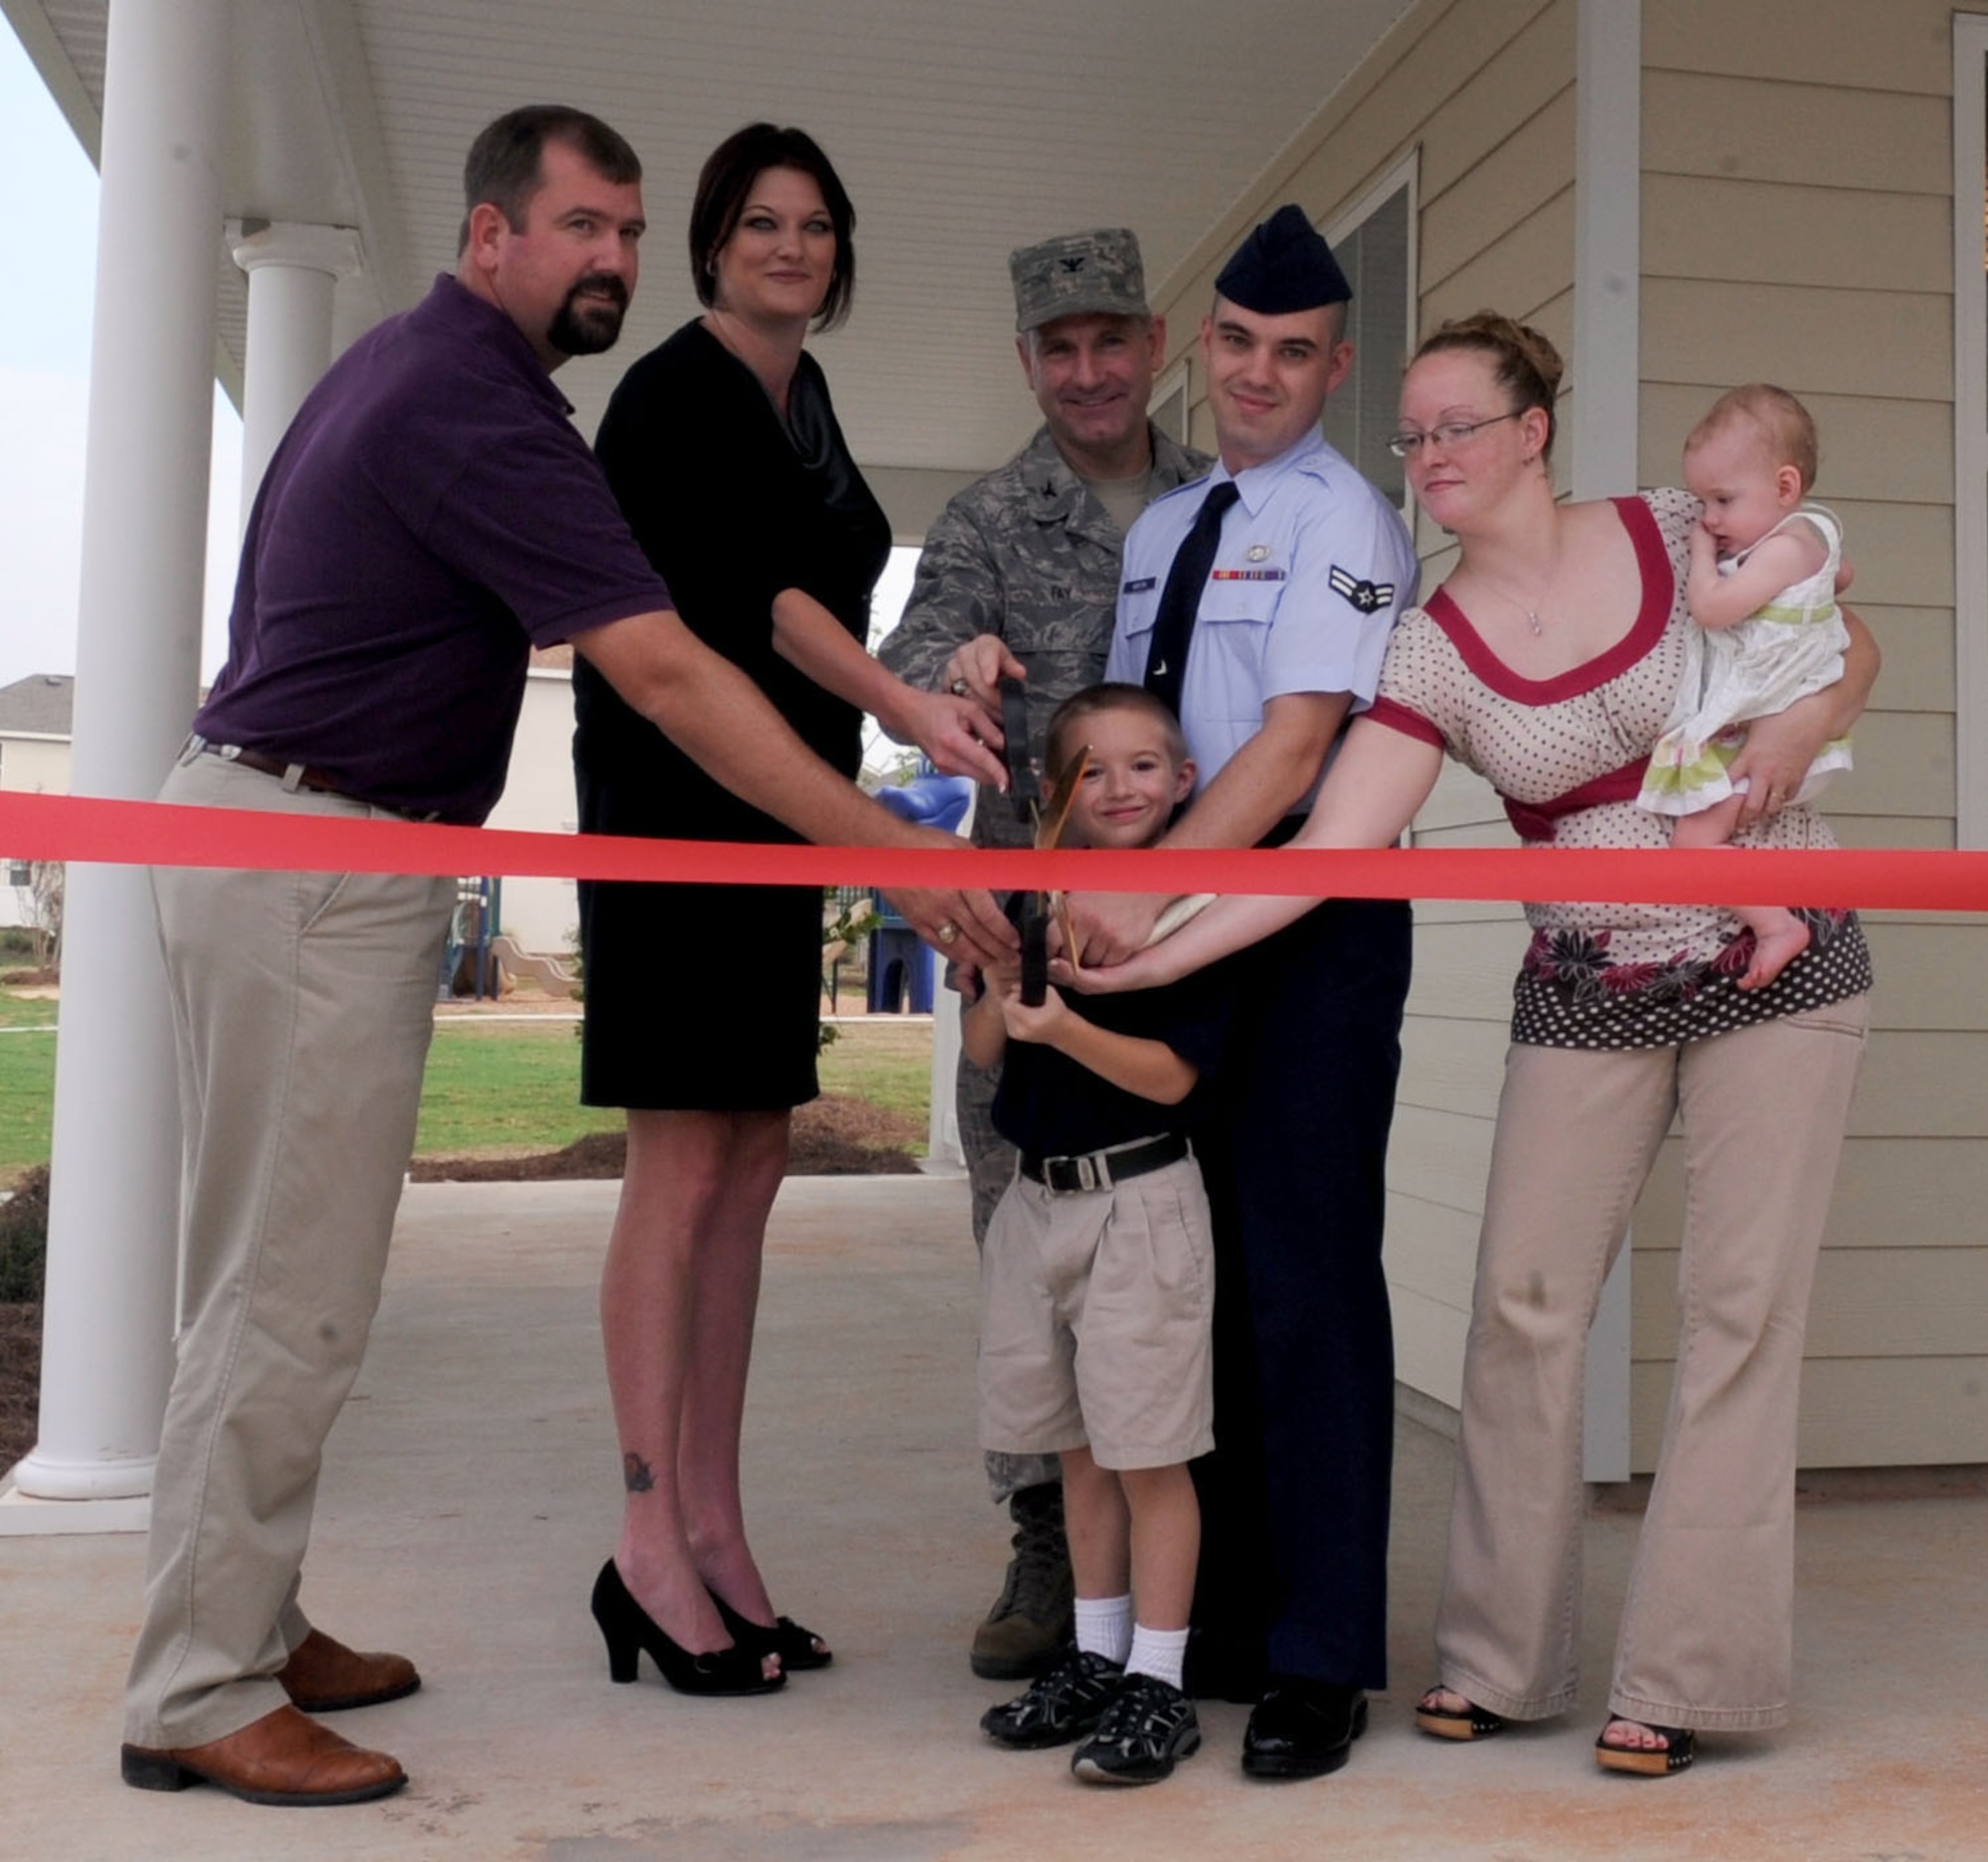 BARKSDALE AIR FORCE BASE, La. - (From left to right) Matt Hoel, Hunt project manager, Elizabeth Kirkpatrick, Pinnacle investor and Col. Timothy Fay, 2d Bomb Wing commander assist the Boston family, Airman 1st class Gary and Helena, children Gary Jr., 6 and Annie, 11months, wtih the ribbon cutting of their newly three bedroom duplex home Aug. 18.The Boston family is one of 97 families to move into the Liberty Heights housing area. (U.S. Air Force photo by Senior Airman La'Shanette V. Garrett) (RELEASED)